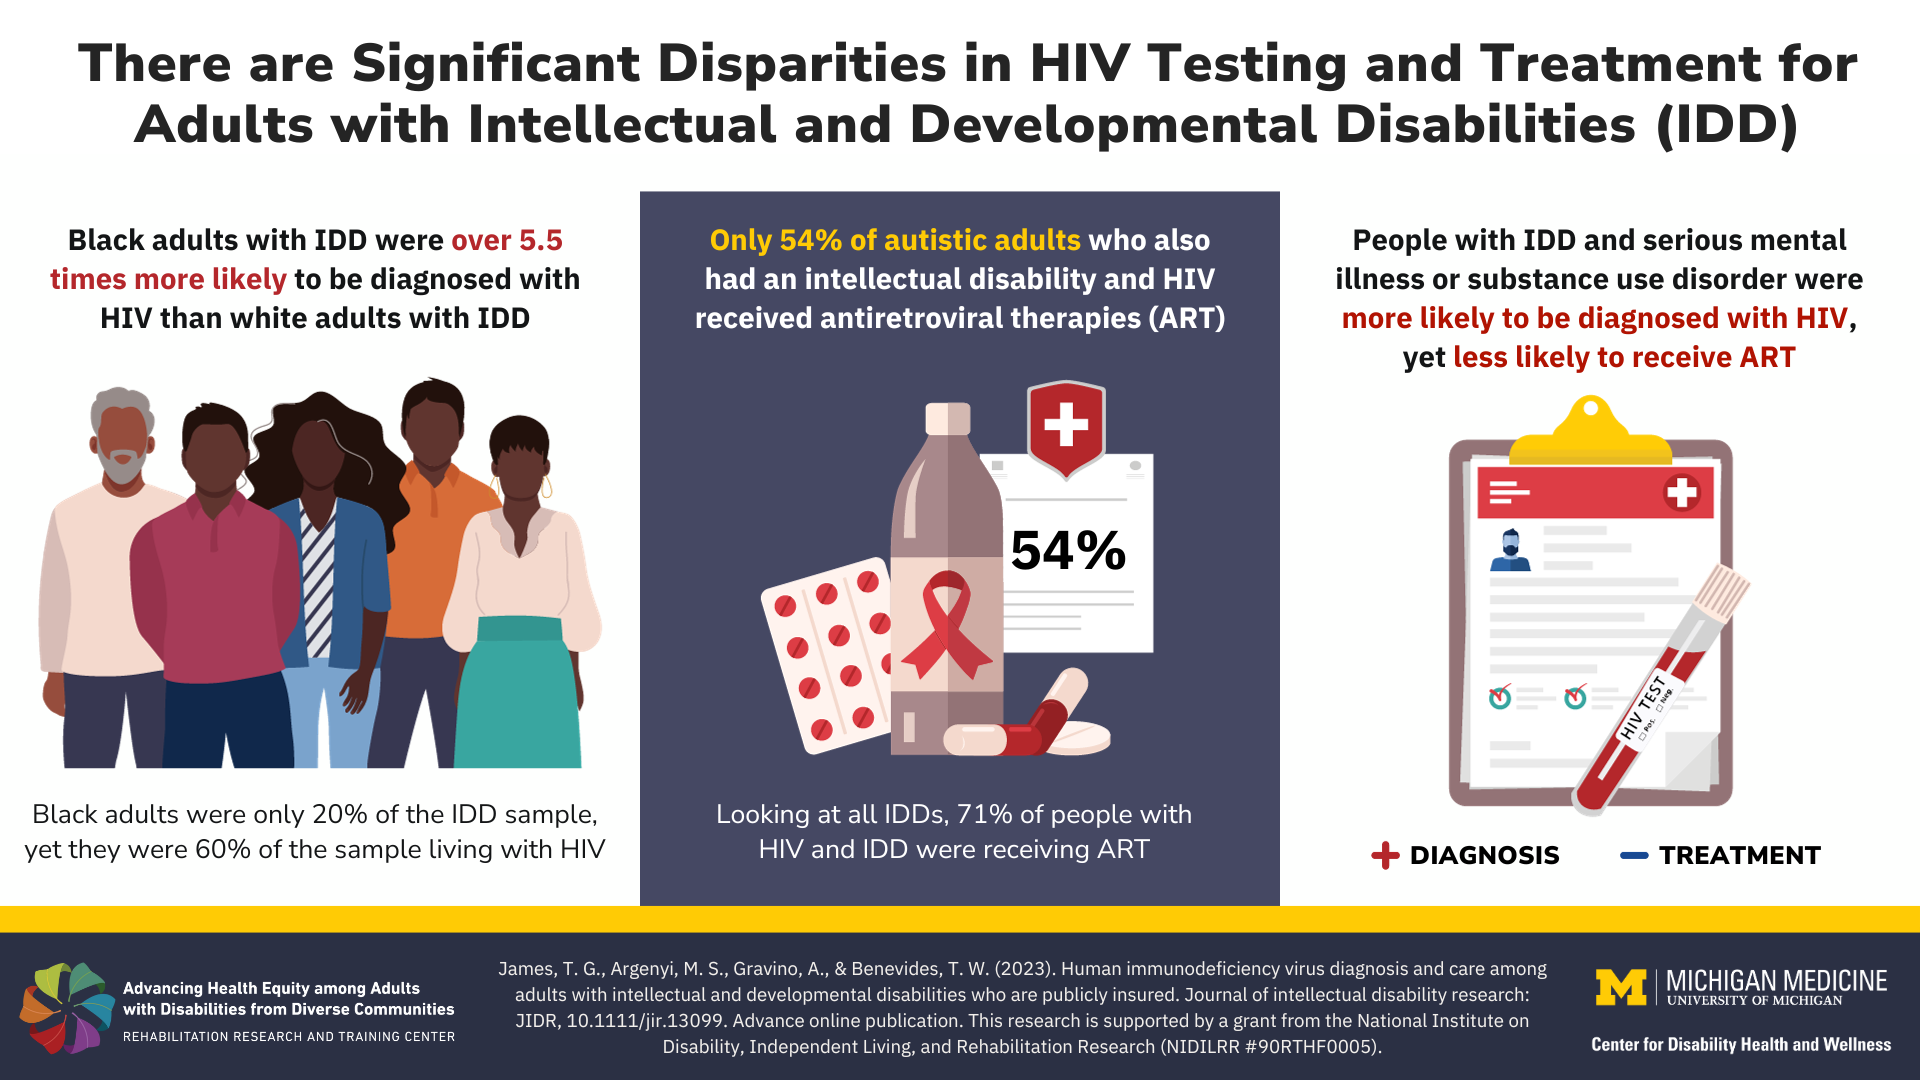 A visual abstract by the University of Michigan Center for Disability Health and Wellness discussing the significant disparities in HIV testing and treatment for adults with intellectual and developmental disabilities. For more details see post text.